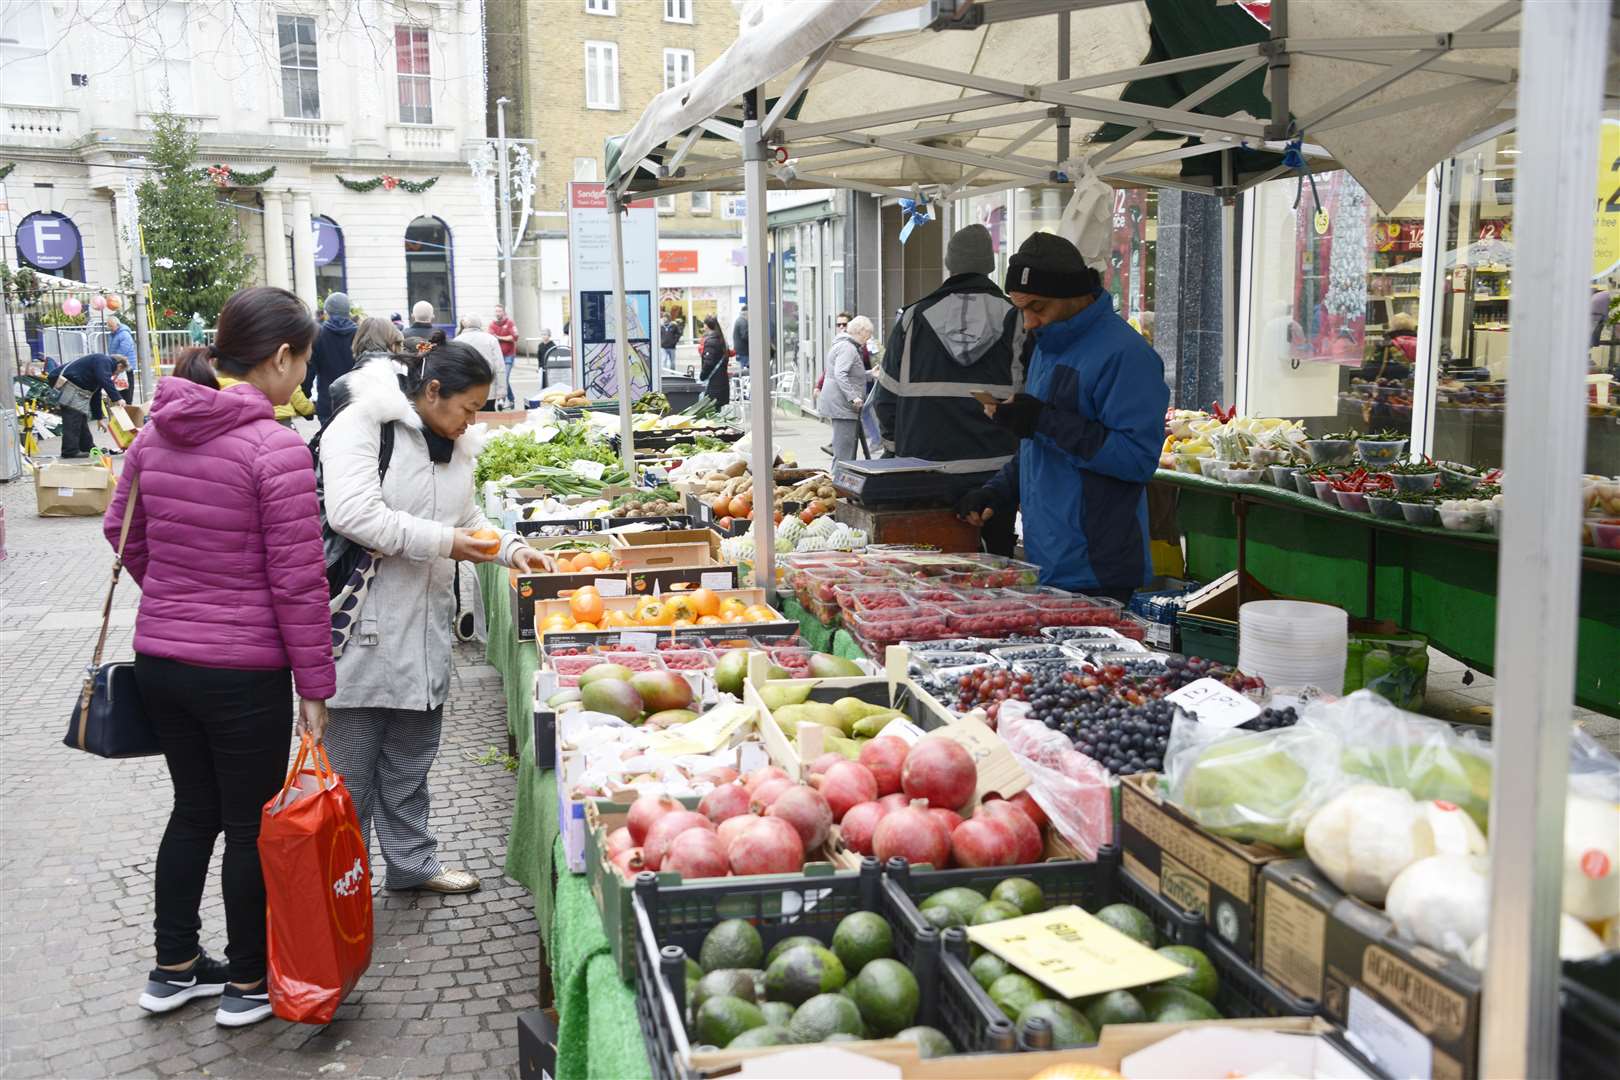 There are a variety of goods on sale at the market, including fruit and veg. Picture: Paul Amos